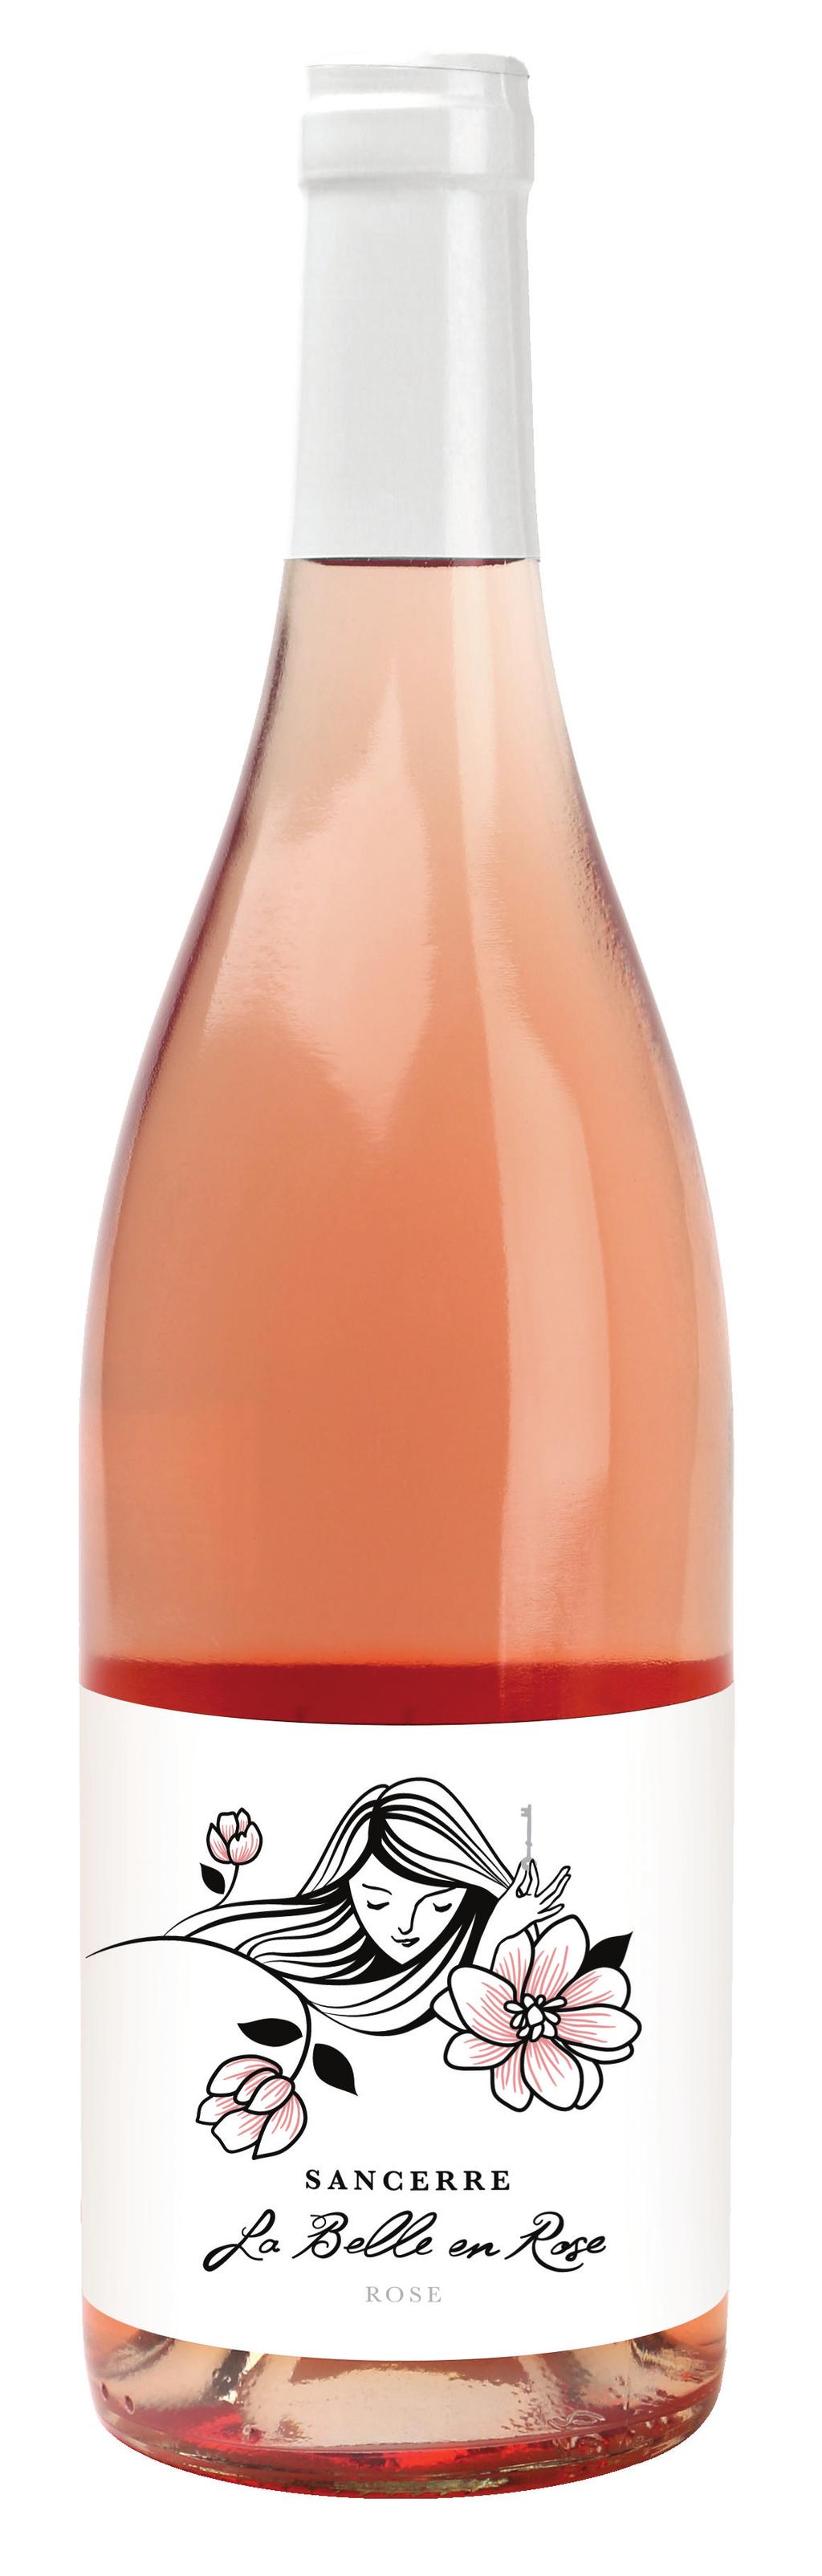 SANCERRE ROSÉ LA BELLE EN ROSE FRANCE - 2016 100% PINOT NOIR Drive two hours south of Paris and you will arrive at the medieval town of Sancerre, perched on a hilltop amidst a sea of vines.